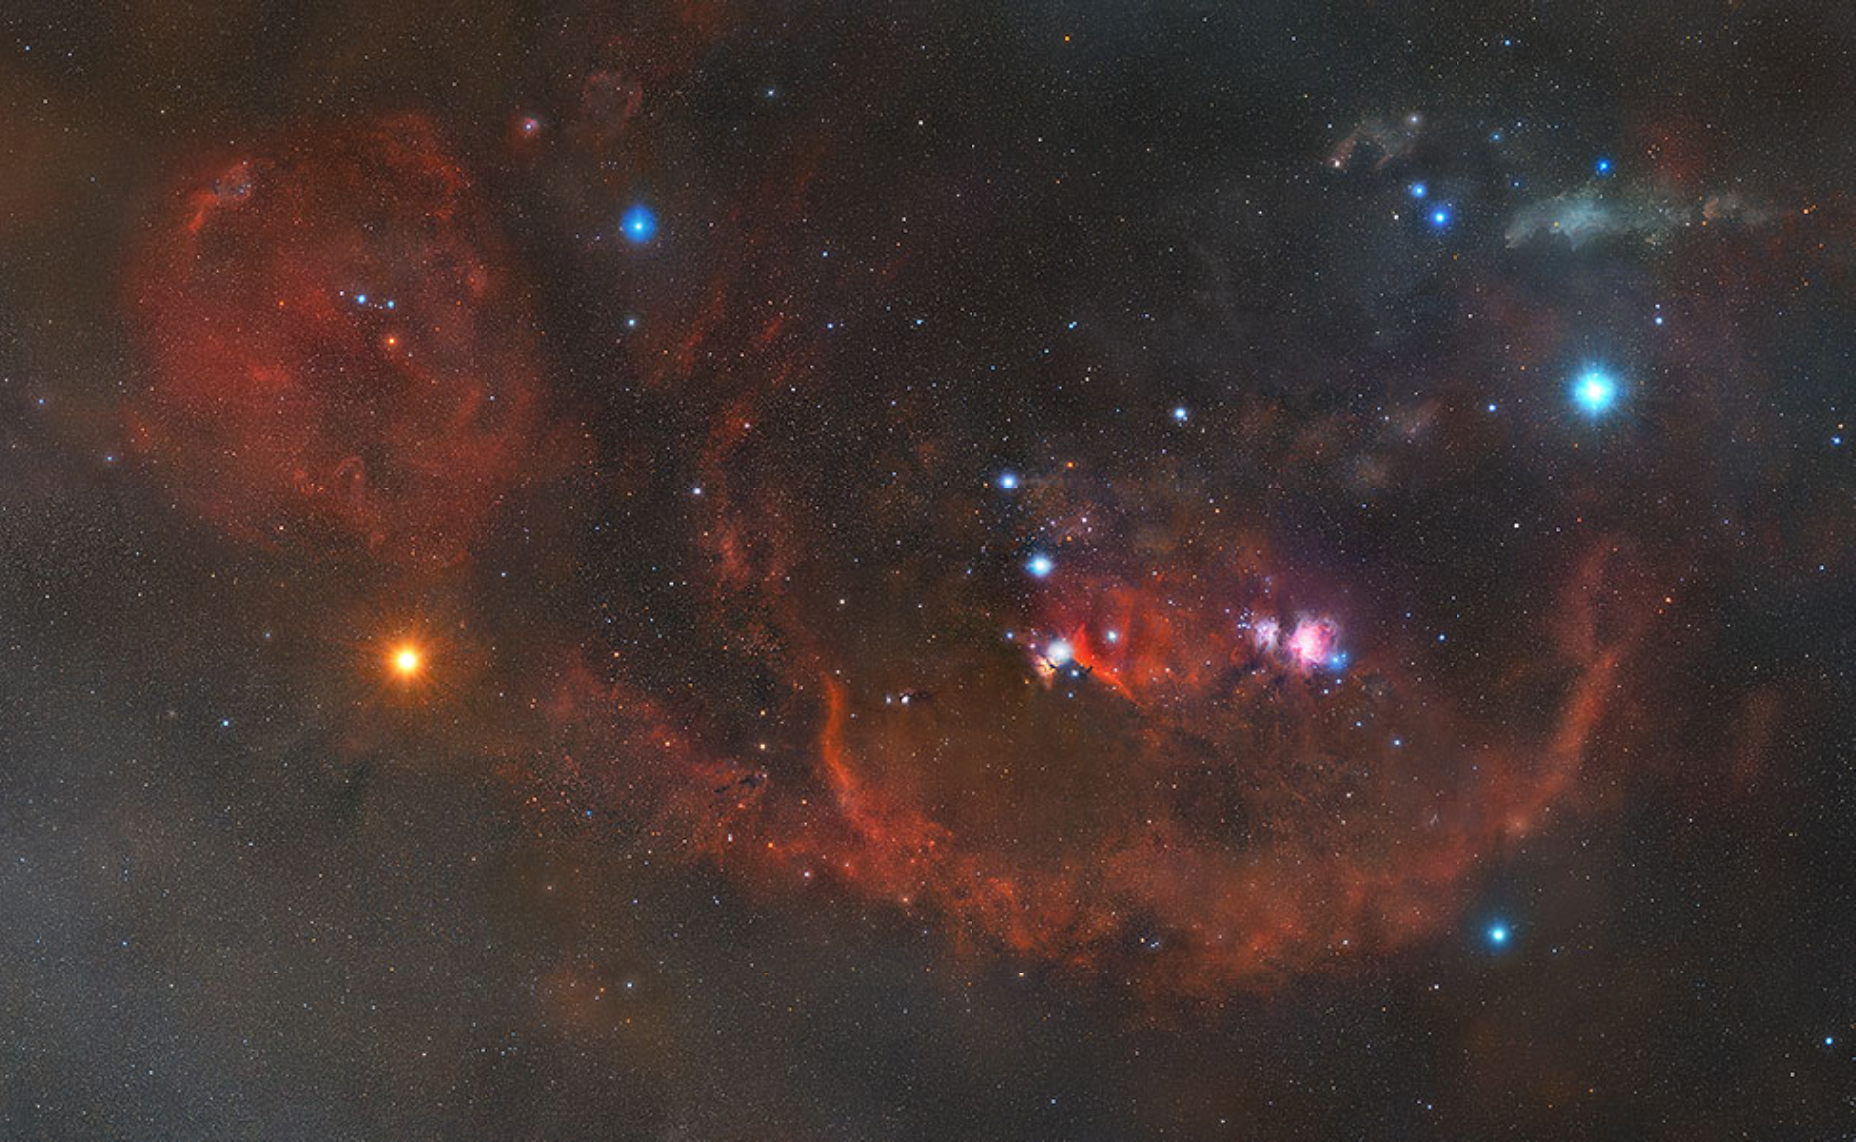 Enhance! Explore the Orion Constellation in Astounding Detail with This 2.5 Gigapixel Image That Took Five Years to Complete